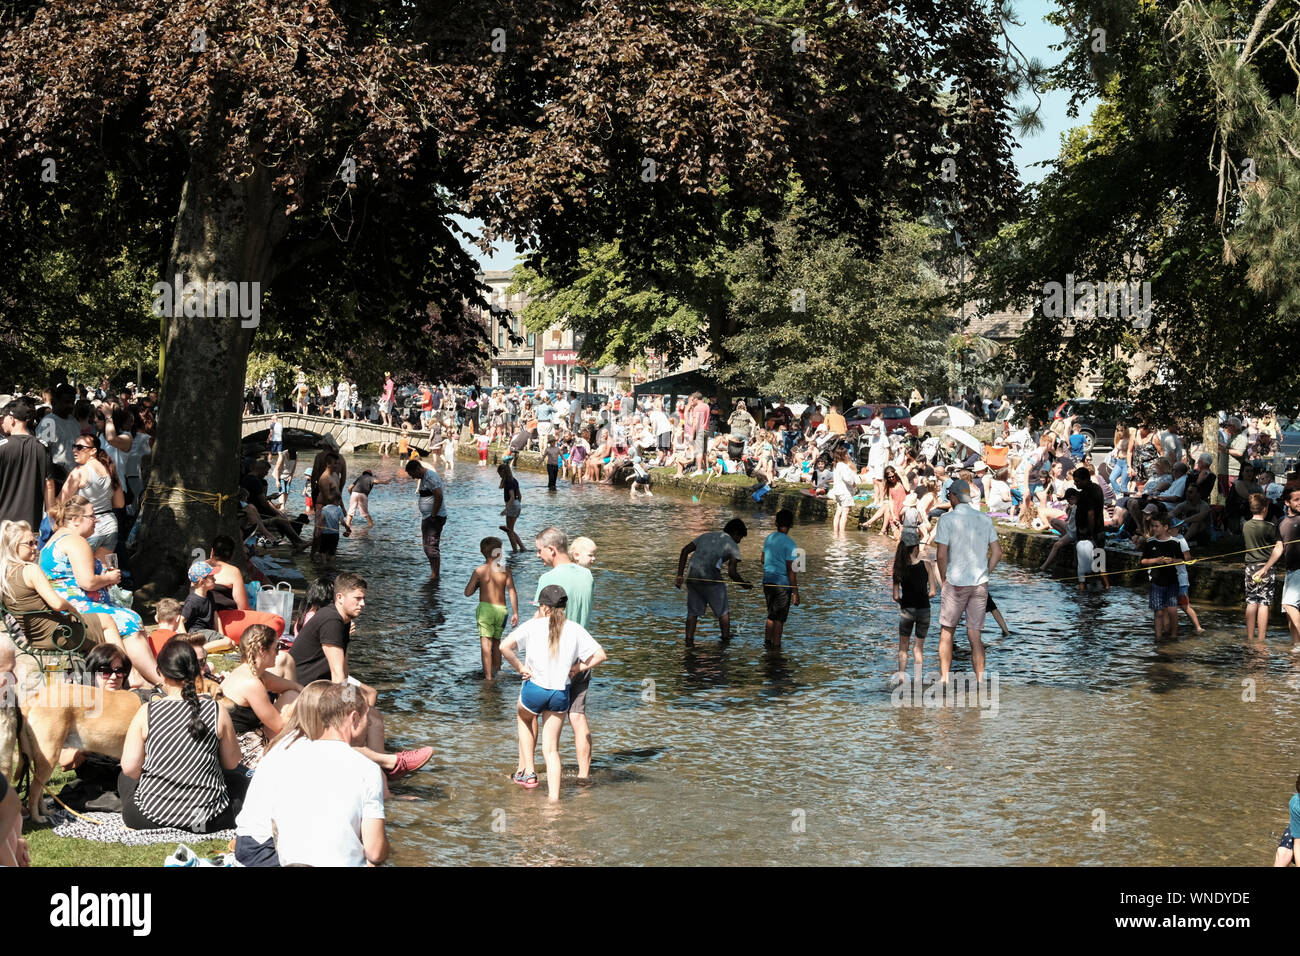 August Bank Holiday festivities in Bourton-on-the Water Gloucestershire UK. Paddling in the River. Stock Photo